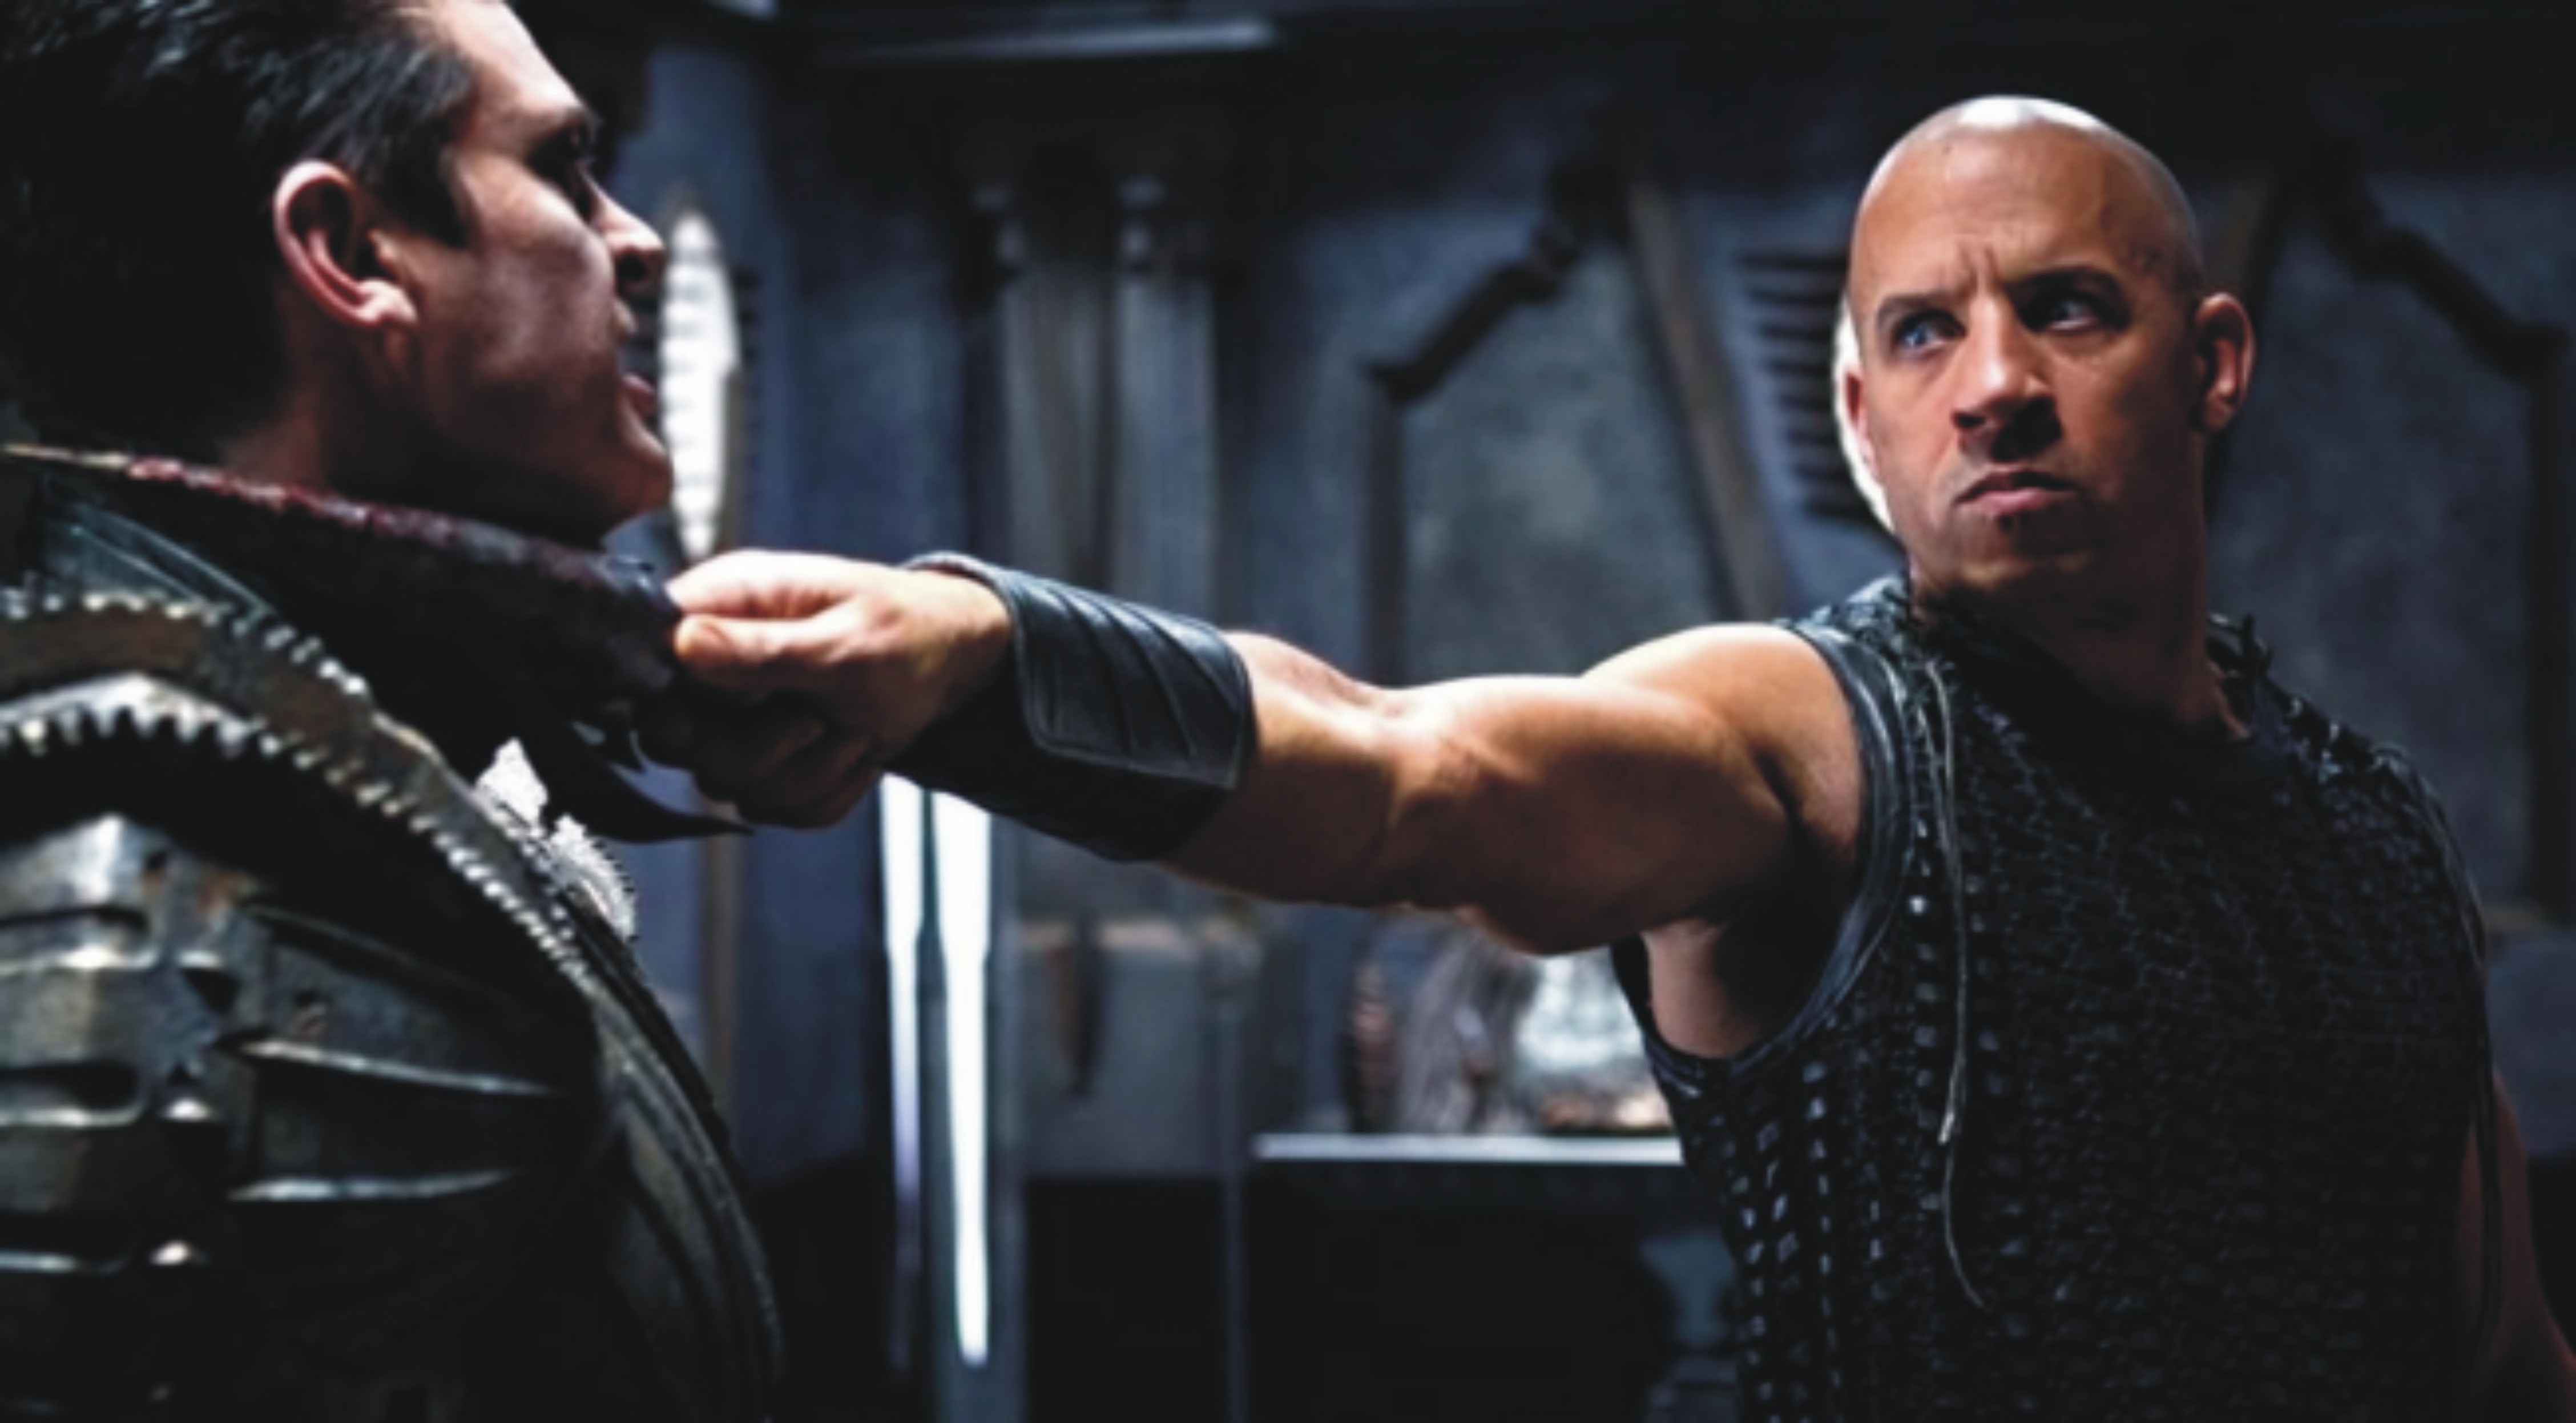 Movie The Chronicles Of Riddick HD Wallpaper | Background Image